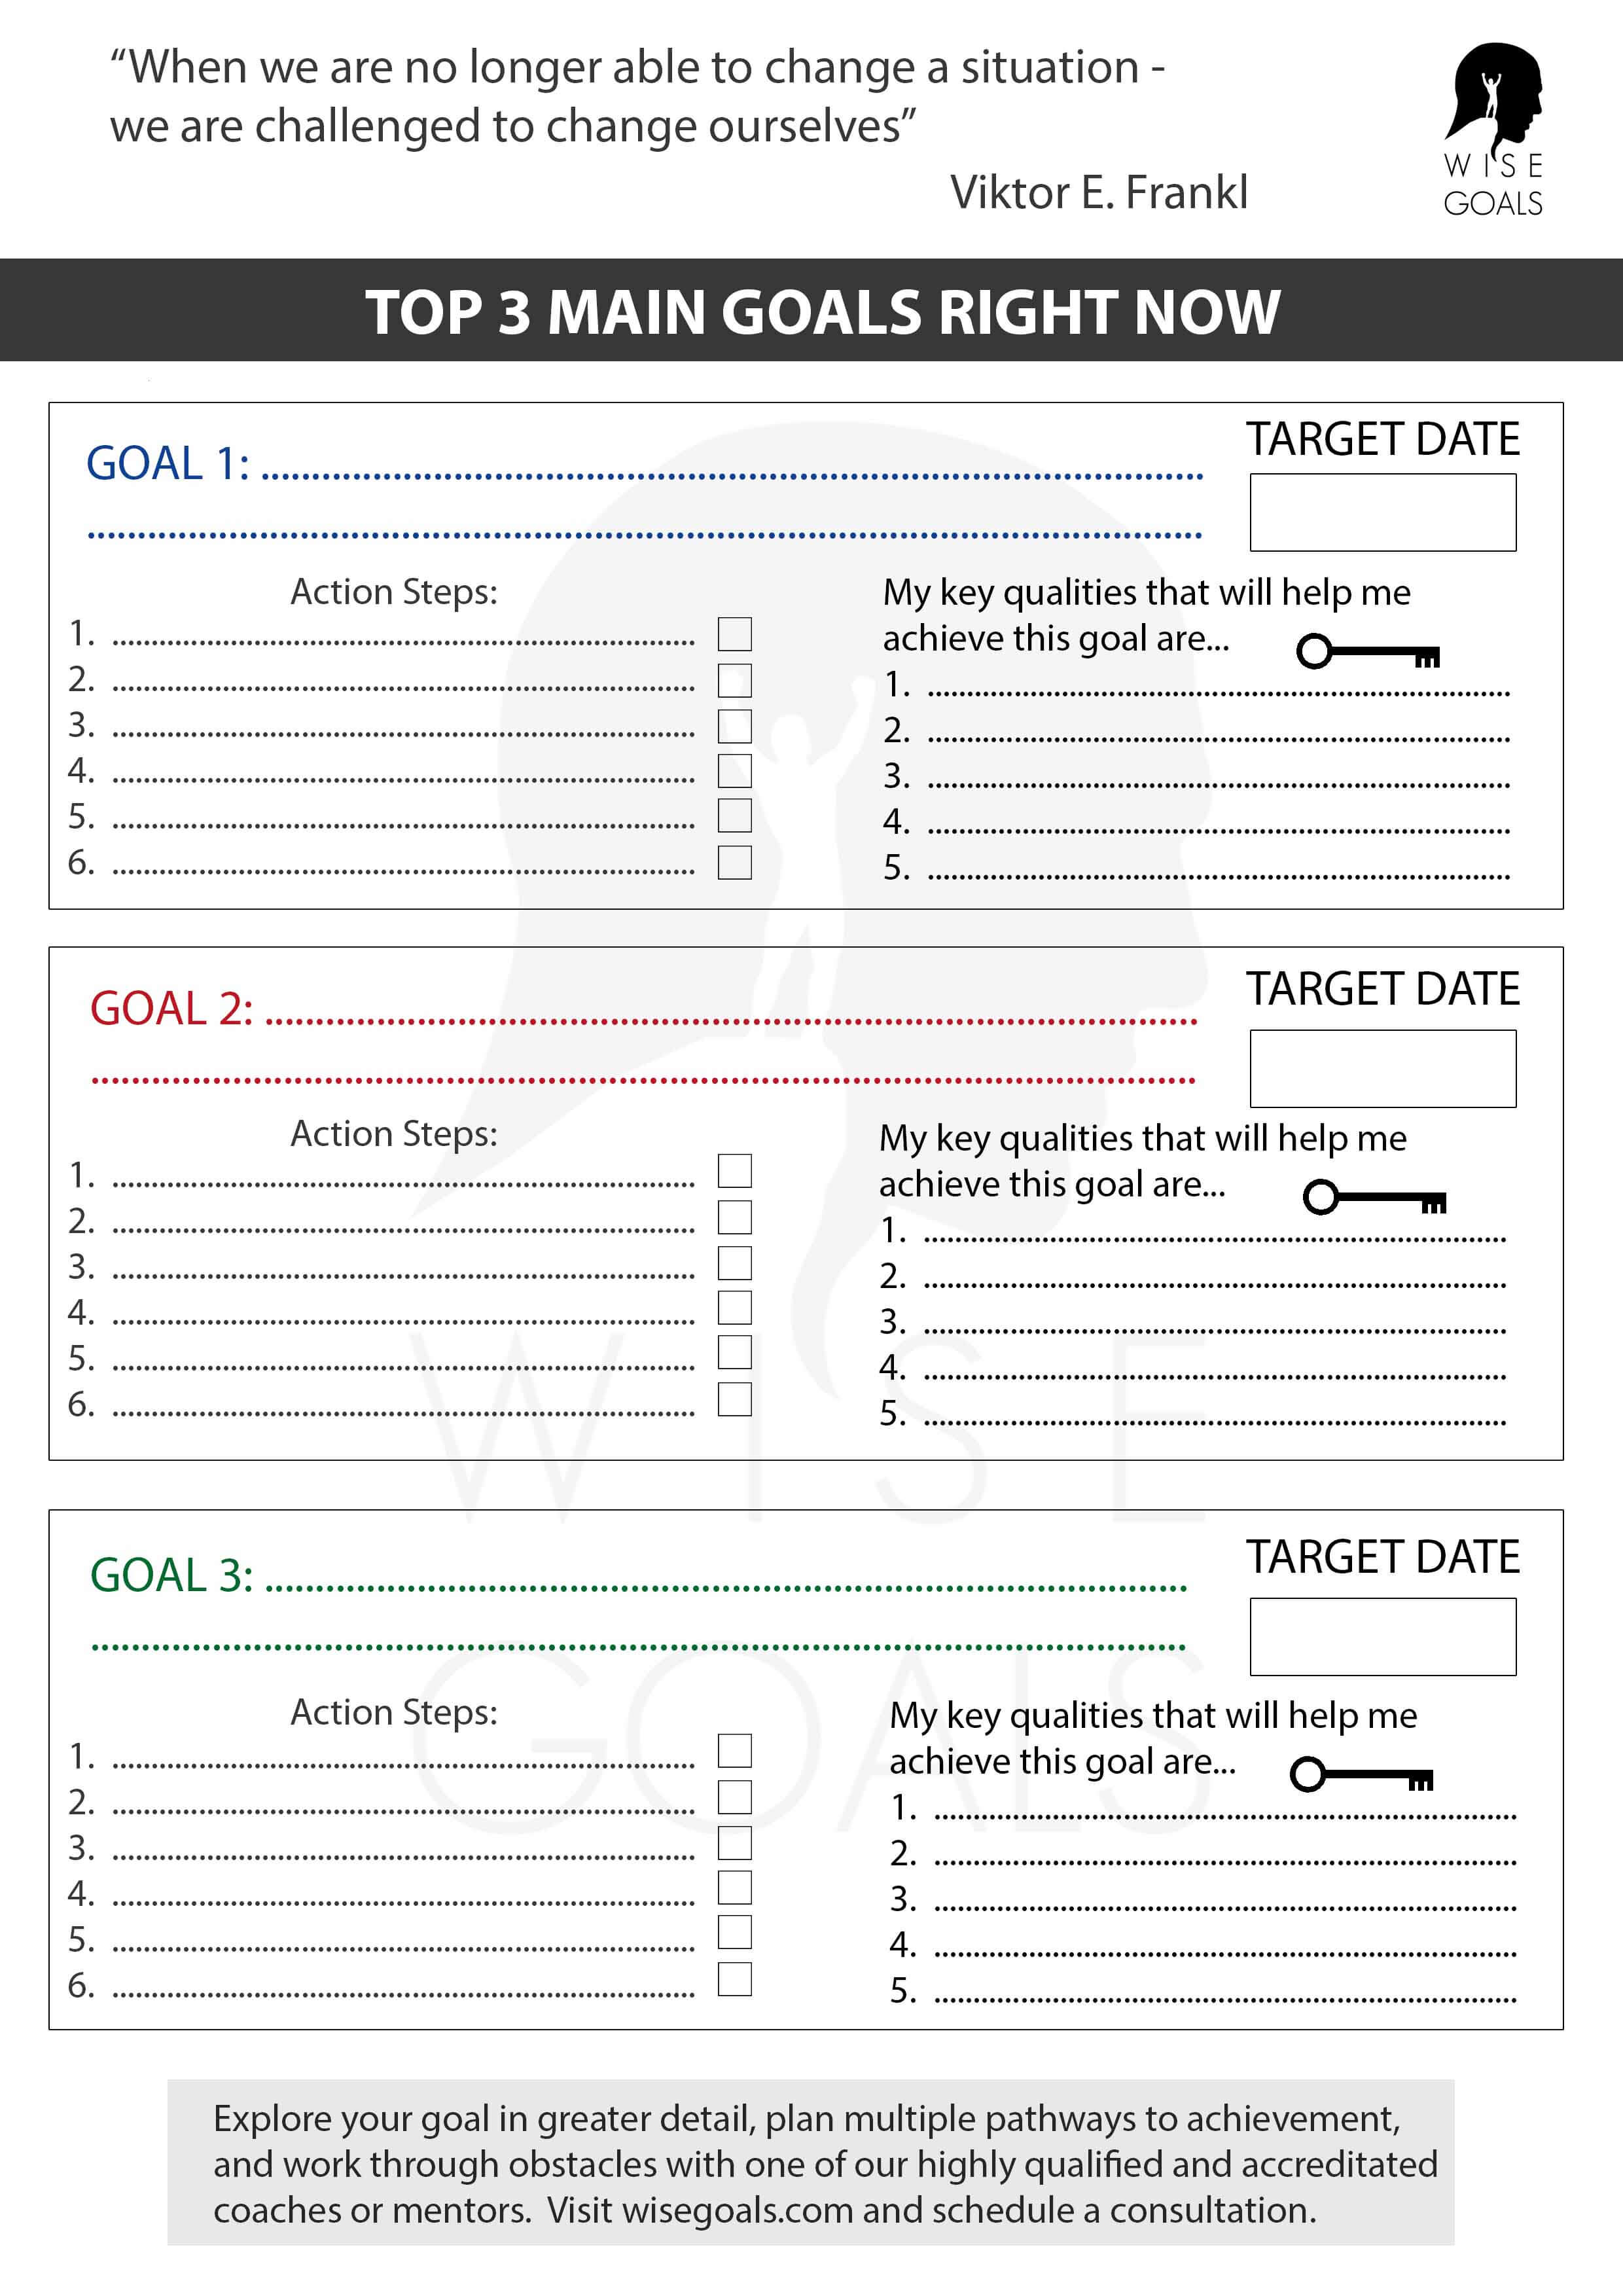 6 Useful Goal Setting Templates and One Step Closer to Achievement!